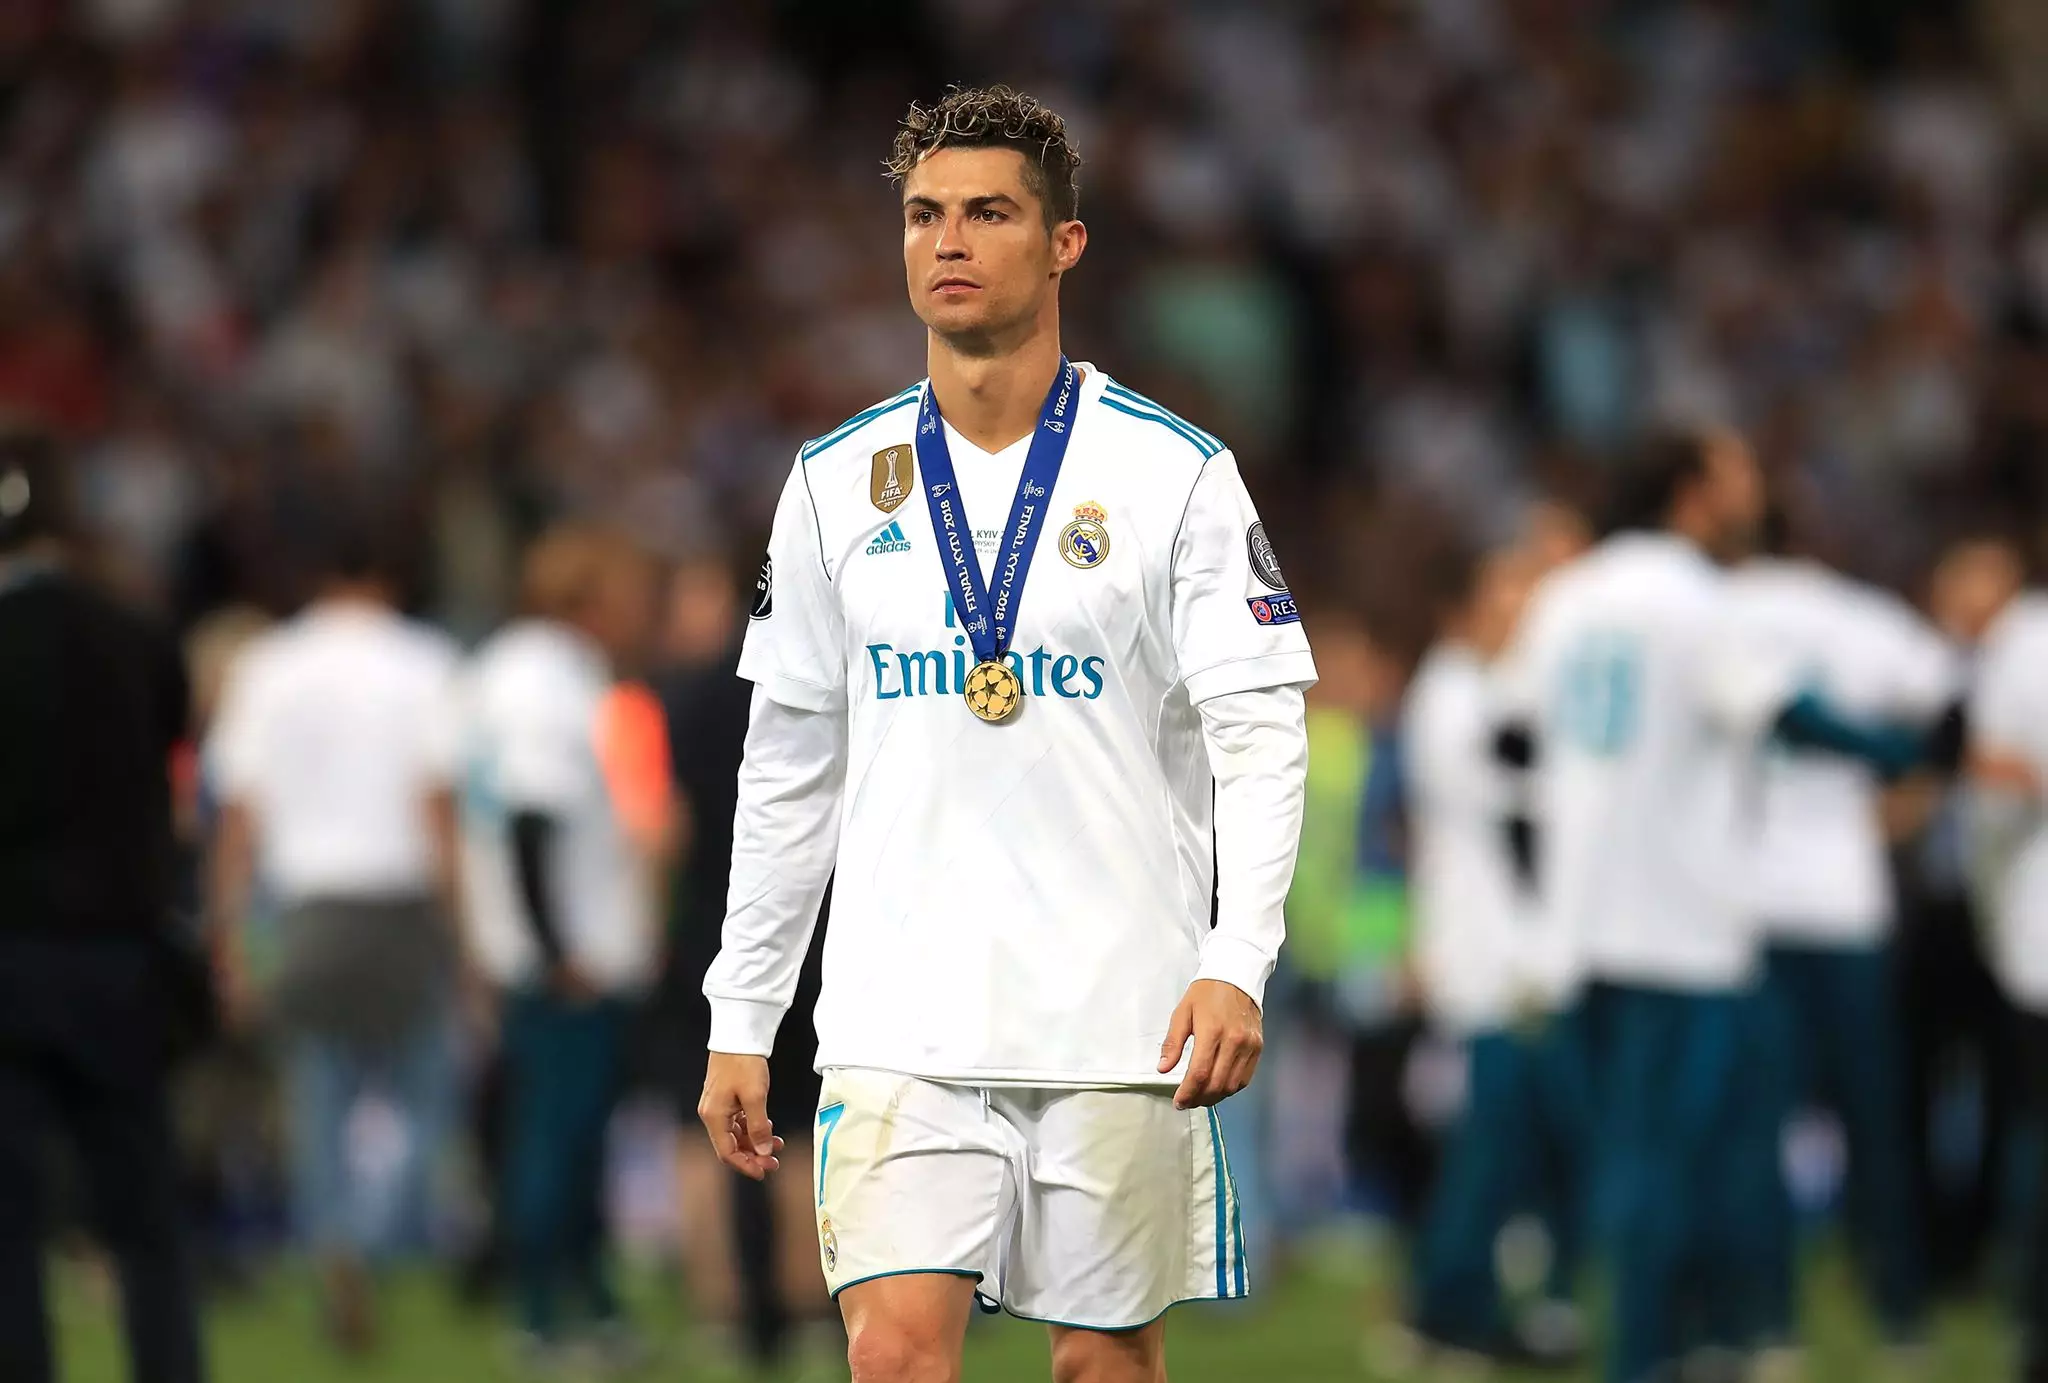 Ronaldo after winning the Champions League. Image: PA Images